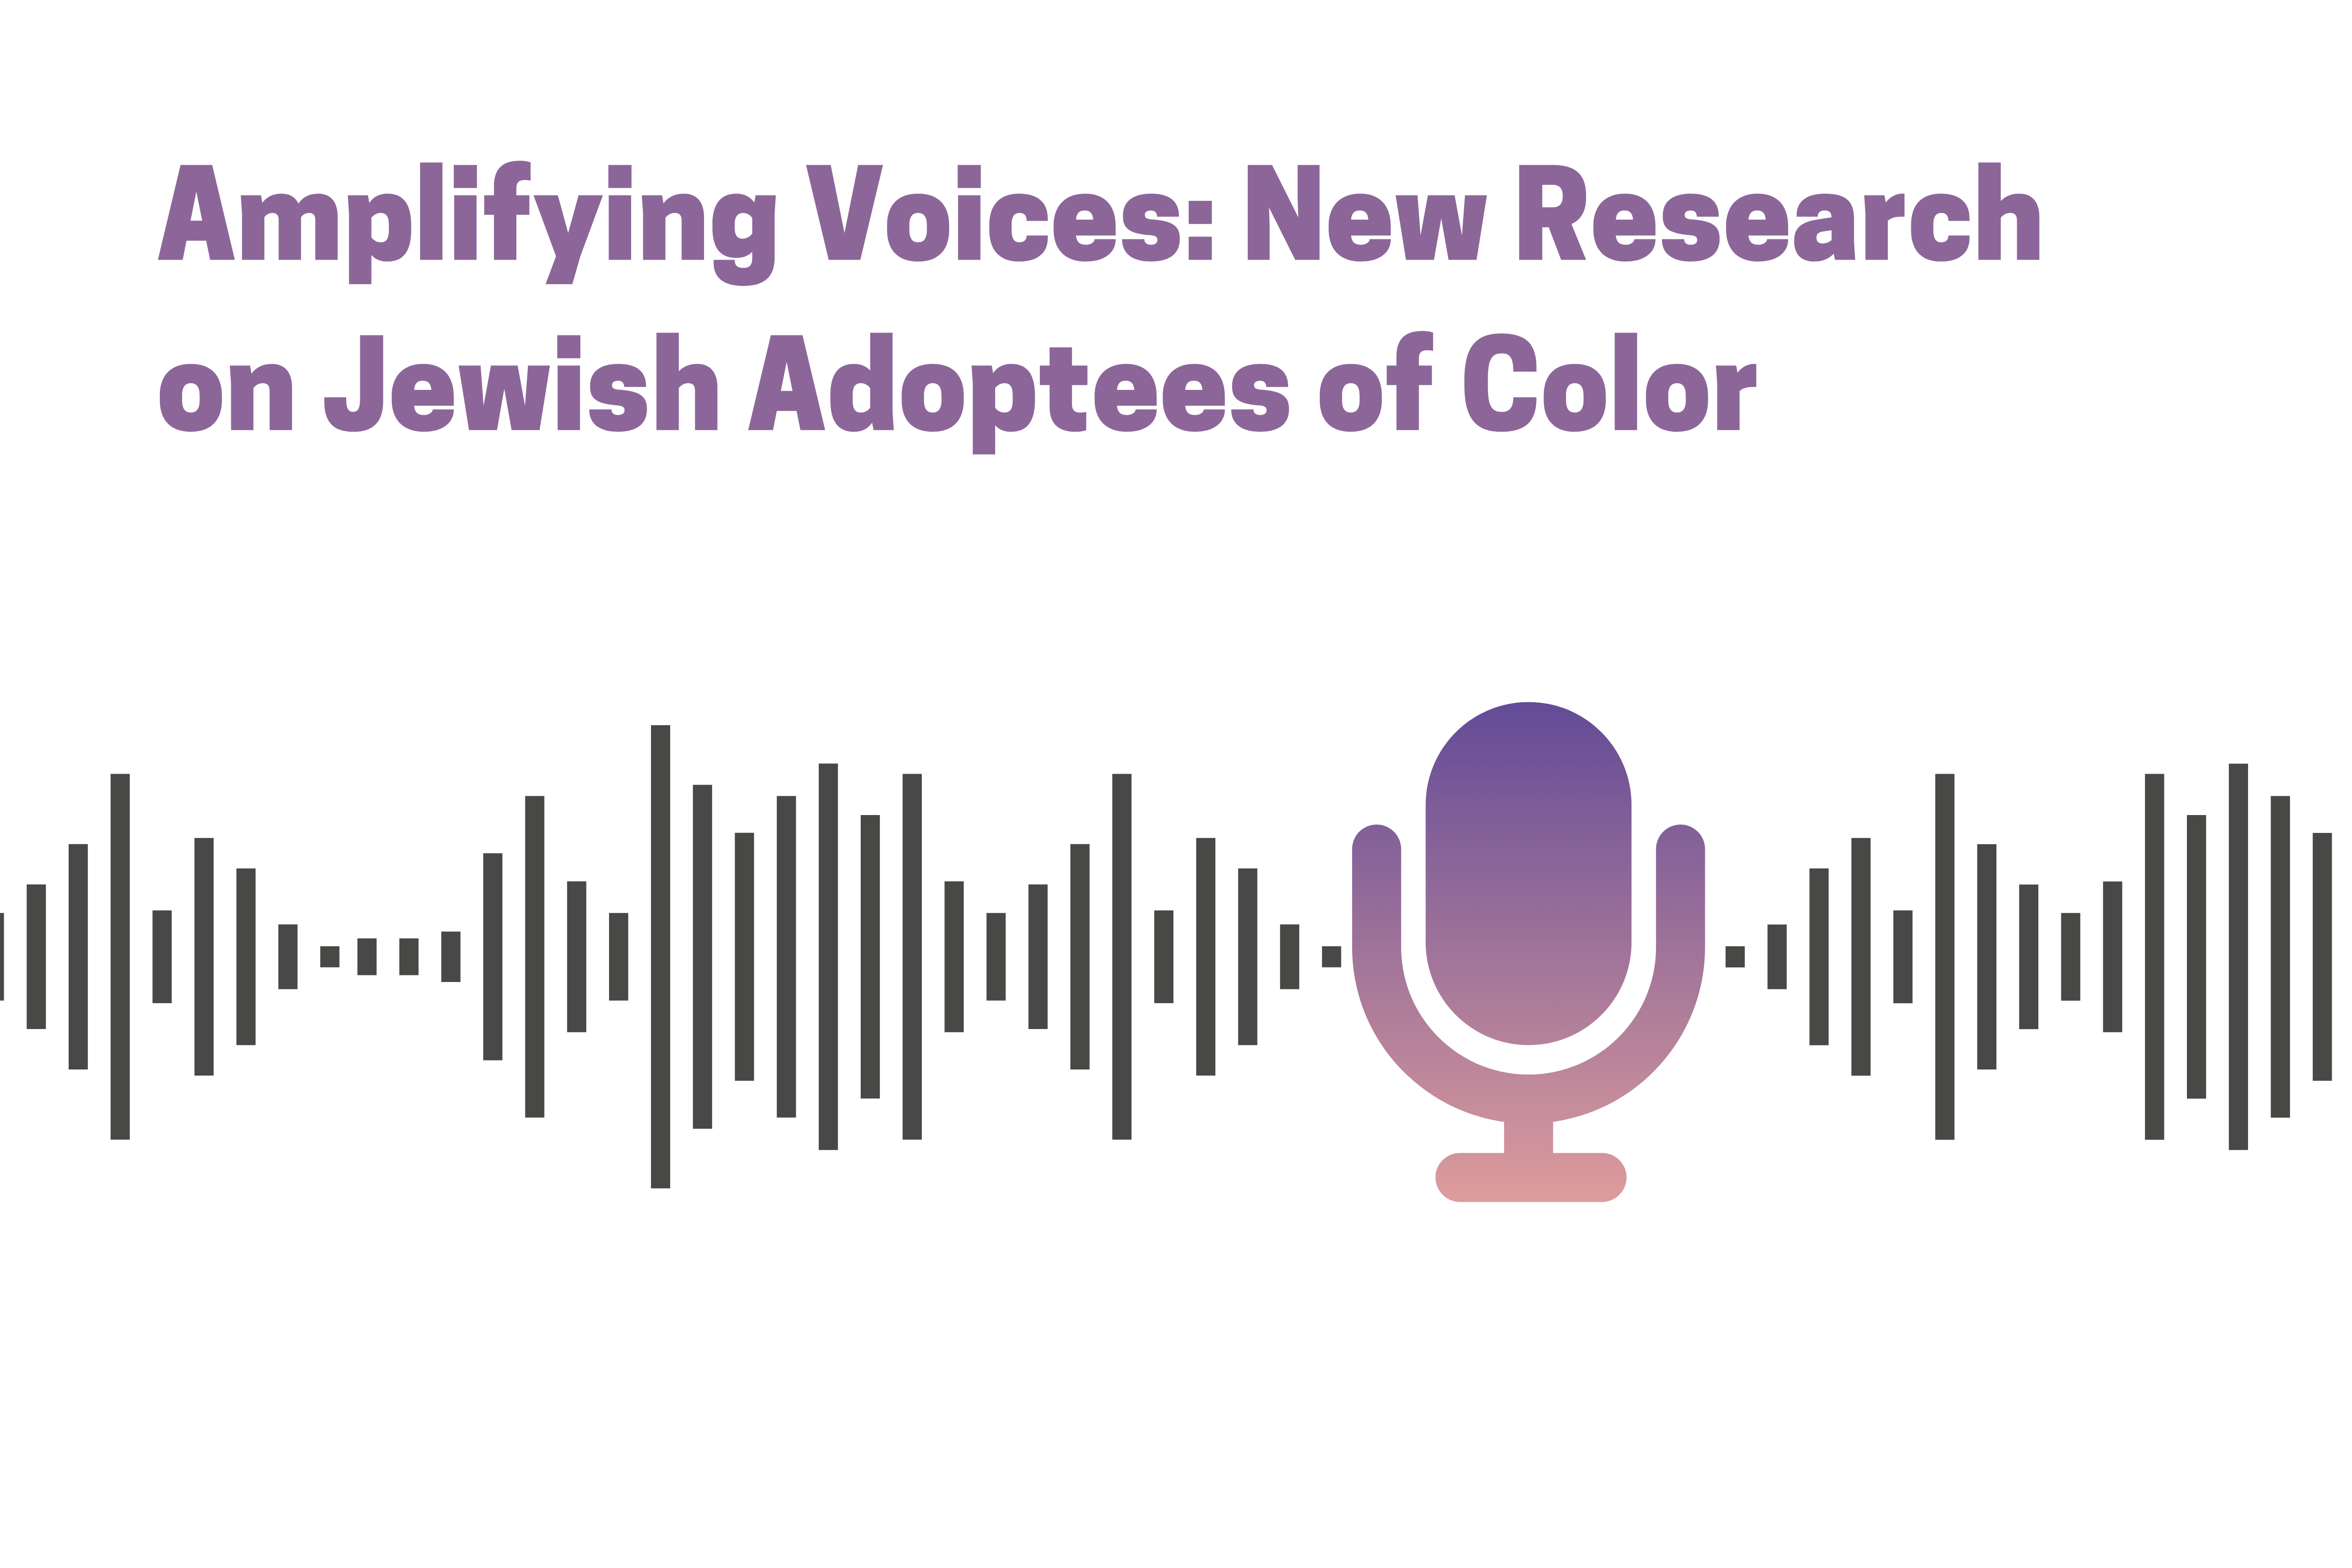 Amplifying Voices: New Research on Jewish Adoptees of Color